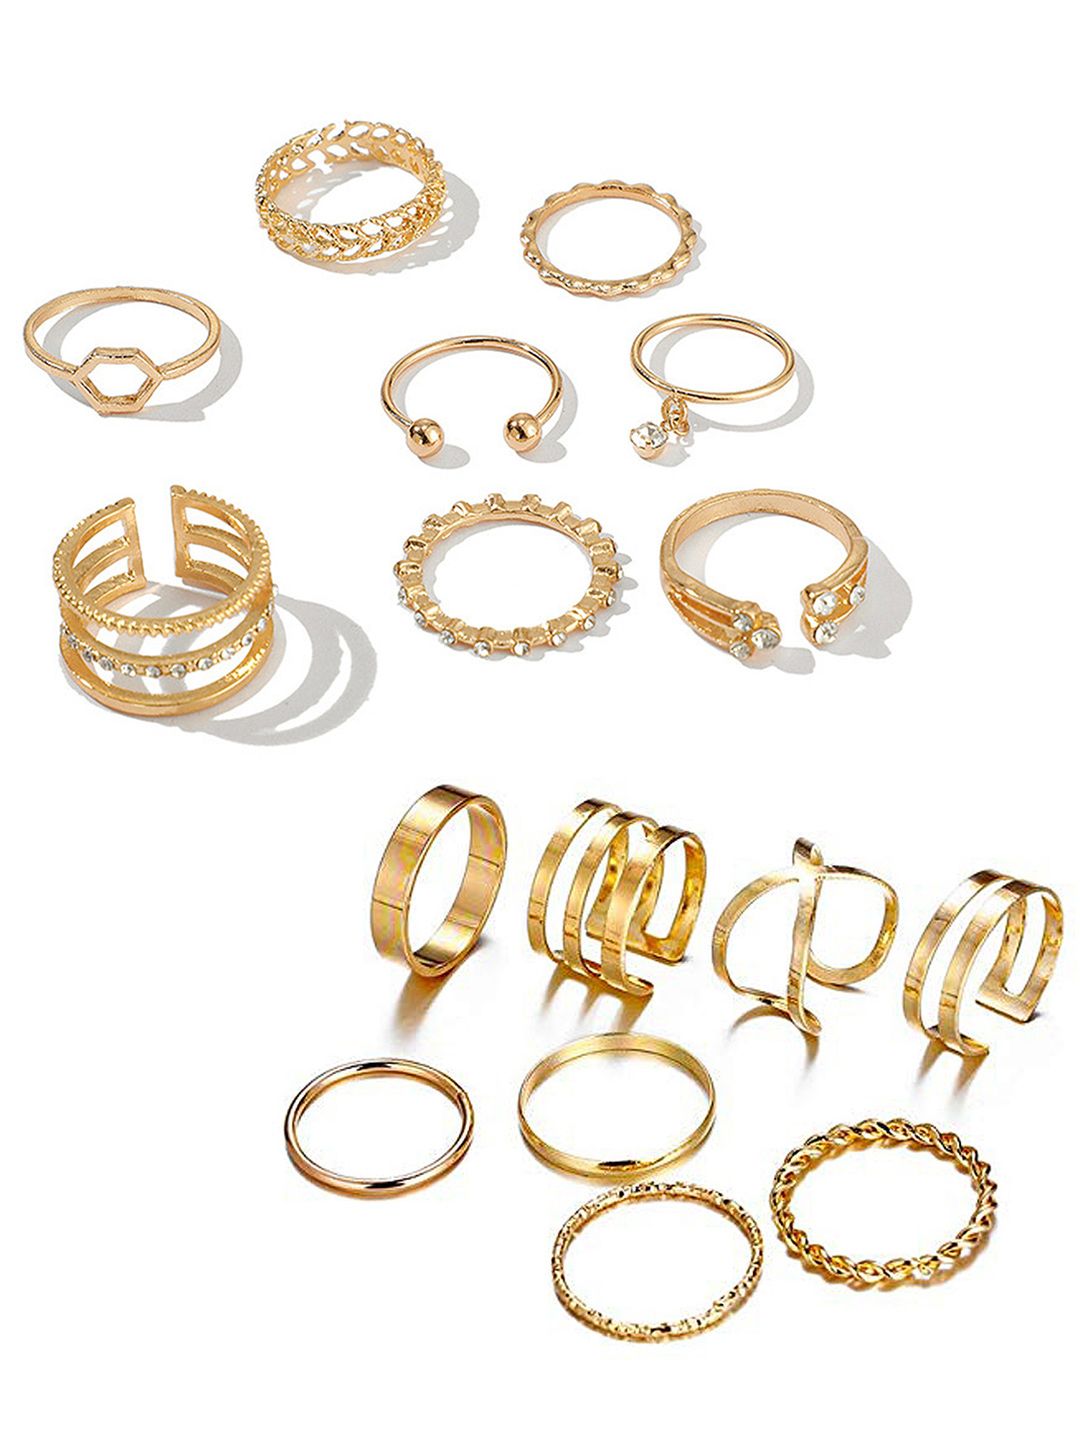 Vembley Gold Plated Set of 16 Piece Stylish Ring Set Price in India